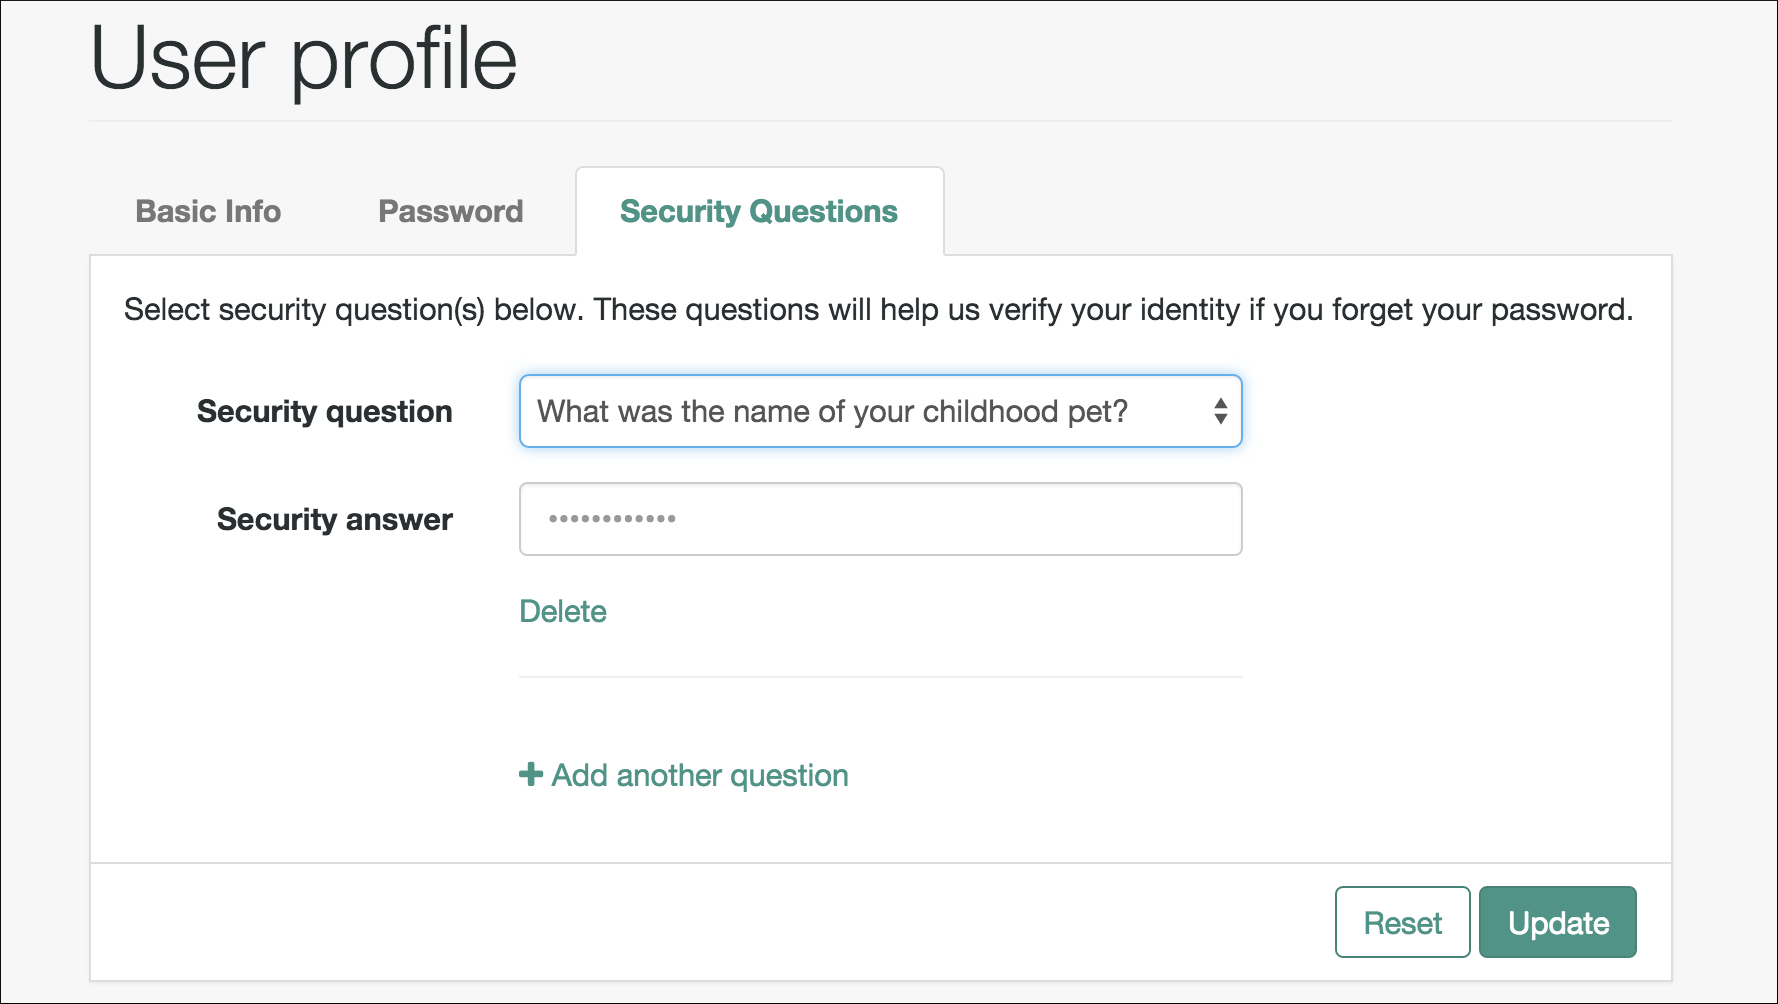 The User Profile page supports the ability to change the user’s security questions on the Security Questions tab.